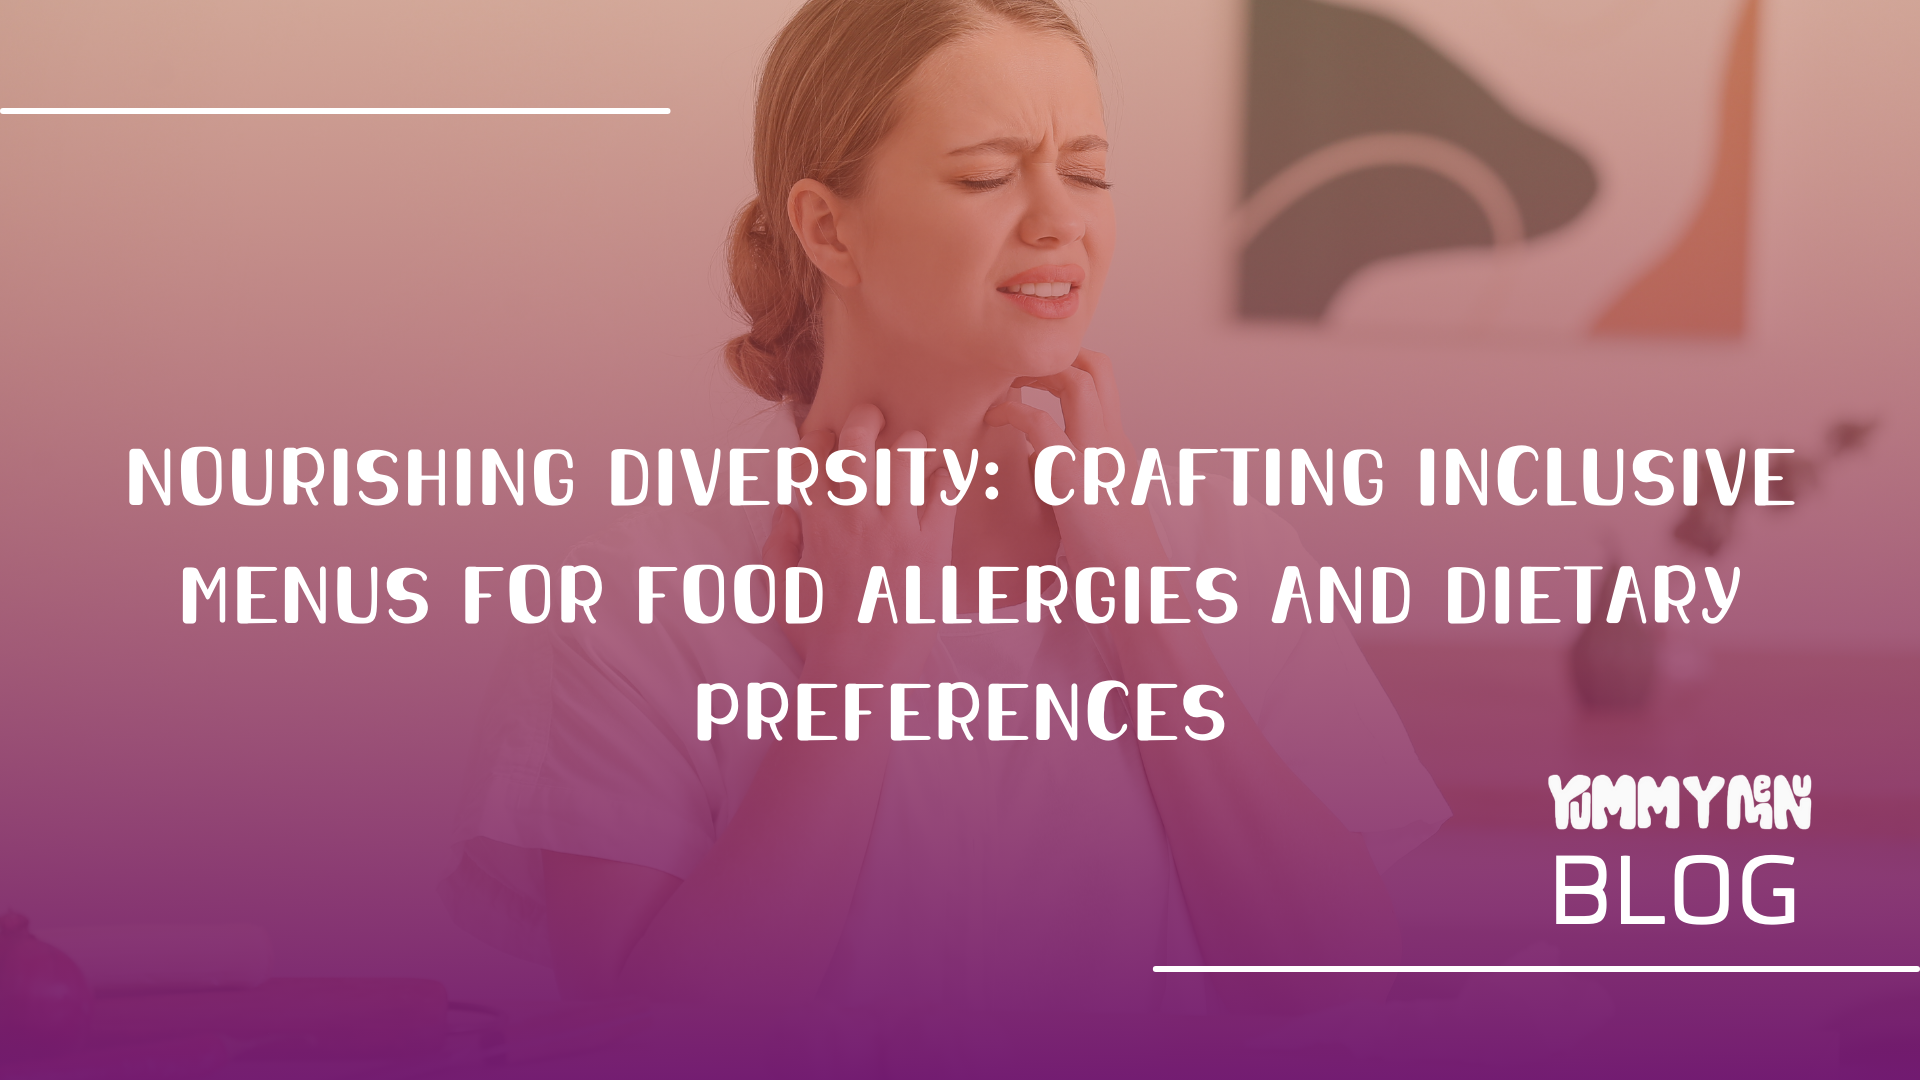 Nourishing Diversity: Crafting Inclusive Menus for Food Allergies and Dietary Preferences